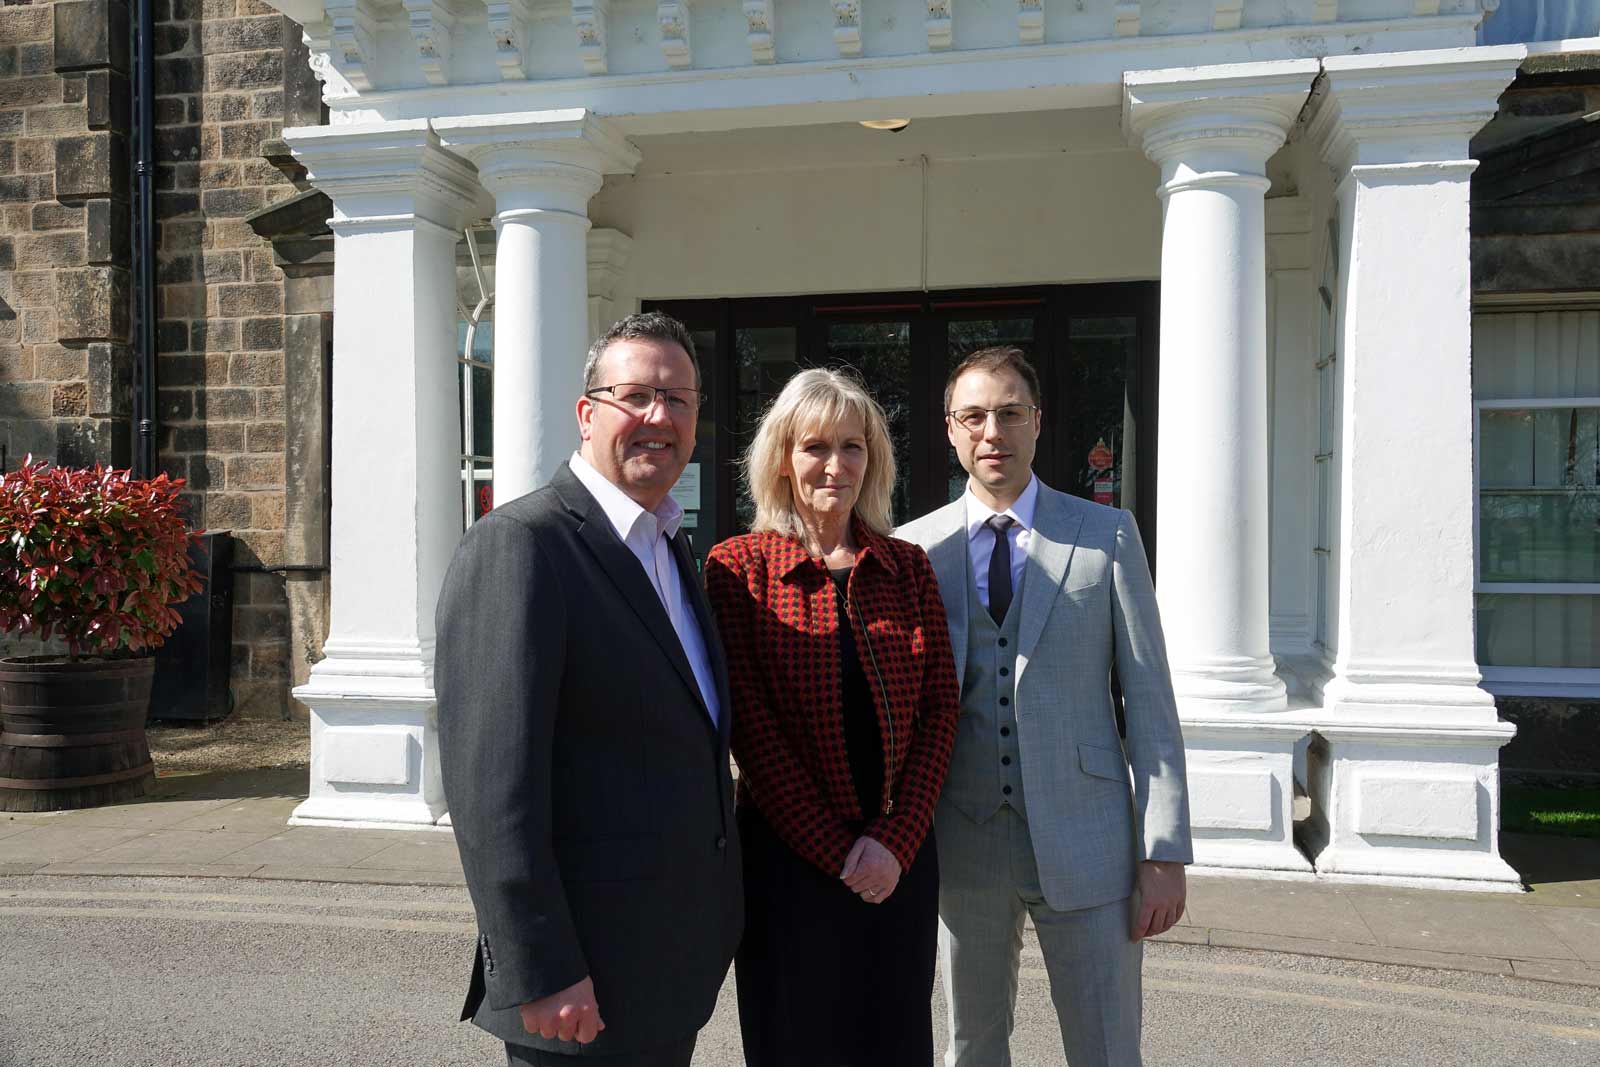 Disability Action Yorkshire Chief Executive Jackie Snape (centre) with Disability Action Yorkshire’s Operations Manager, David Ashton-Jones (right) and Cedar Court Hotel General Manger Simon Cotton